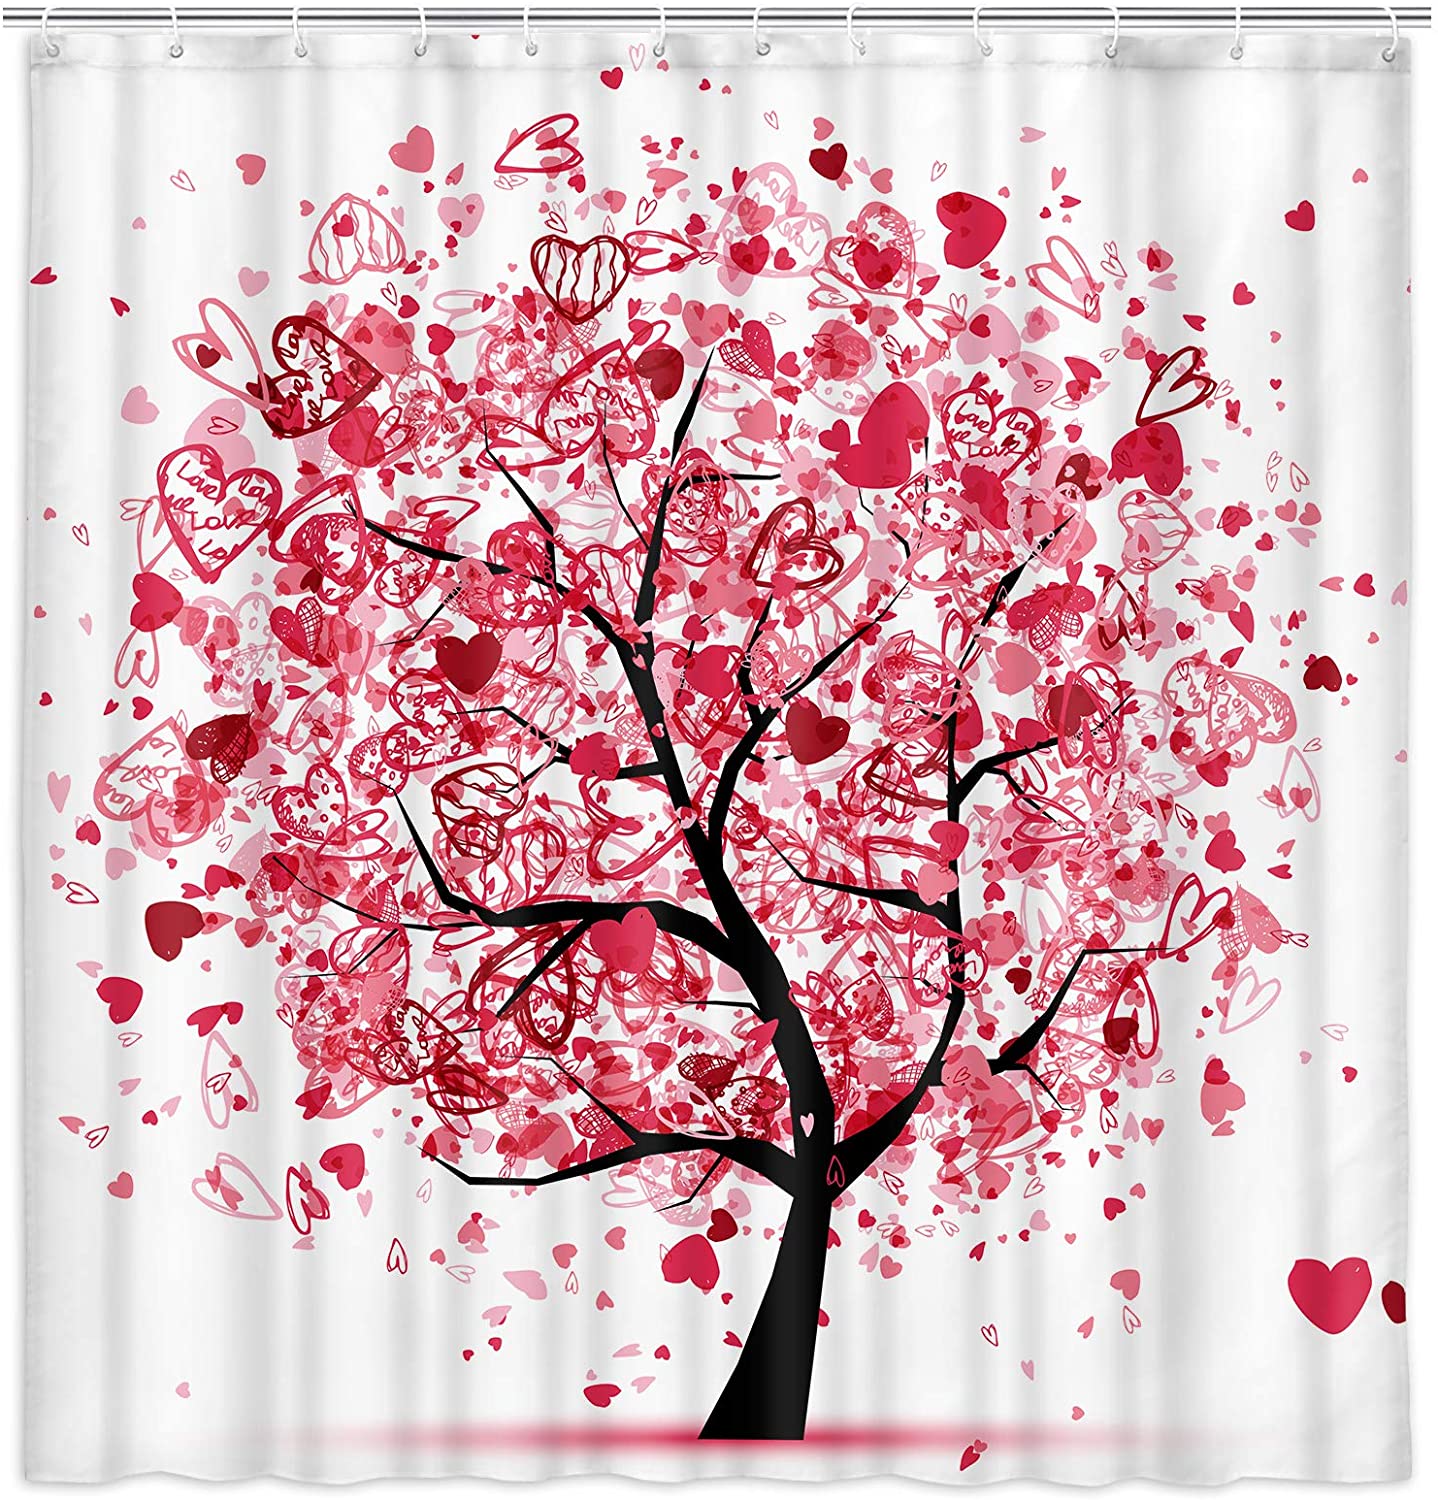 Cheap PriceList for Chair Covers For Events - Tree of Life Shower Curtain for Bathroom Valentines Tree with Pink Hearts Doodles Decorated Shower Curtain Fabric Bathroom Curtain – DAIRUI